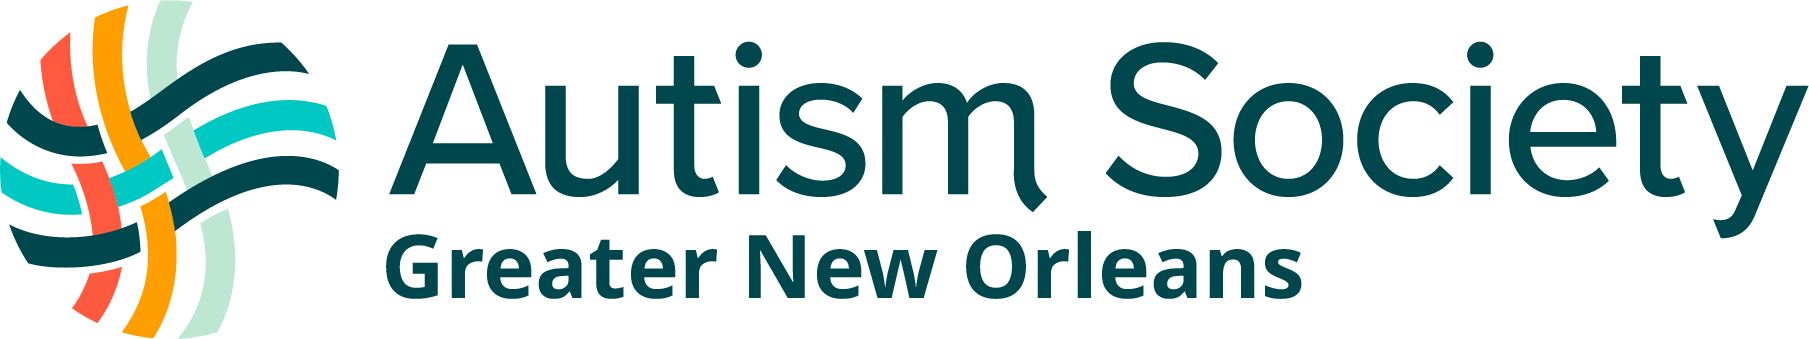 Autism Society of Greater New Orleans